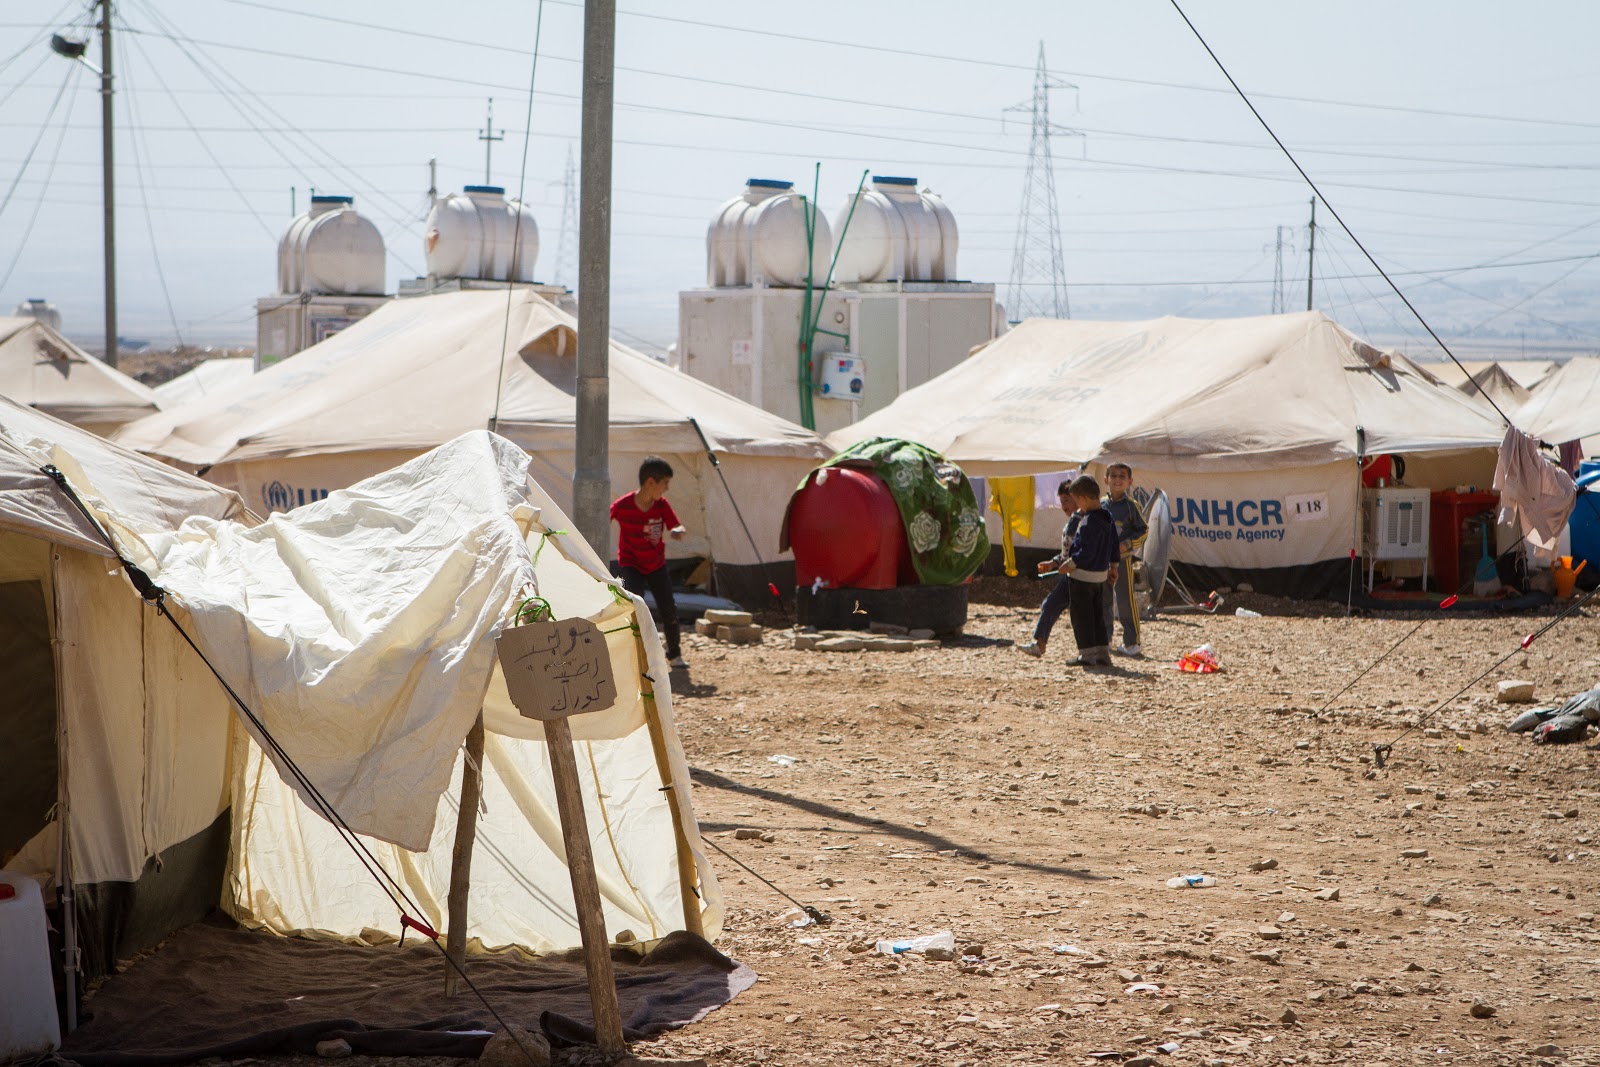 Crisis shelters for Syrian refugees at the transit camp